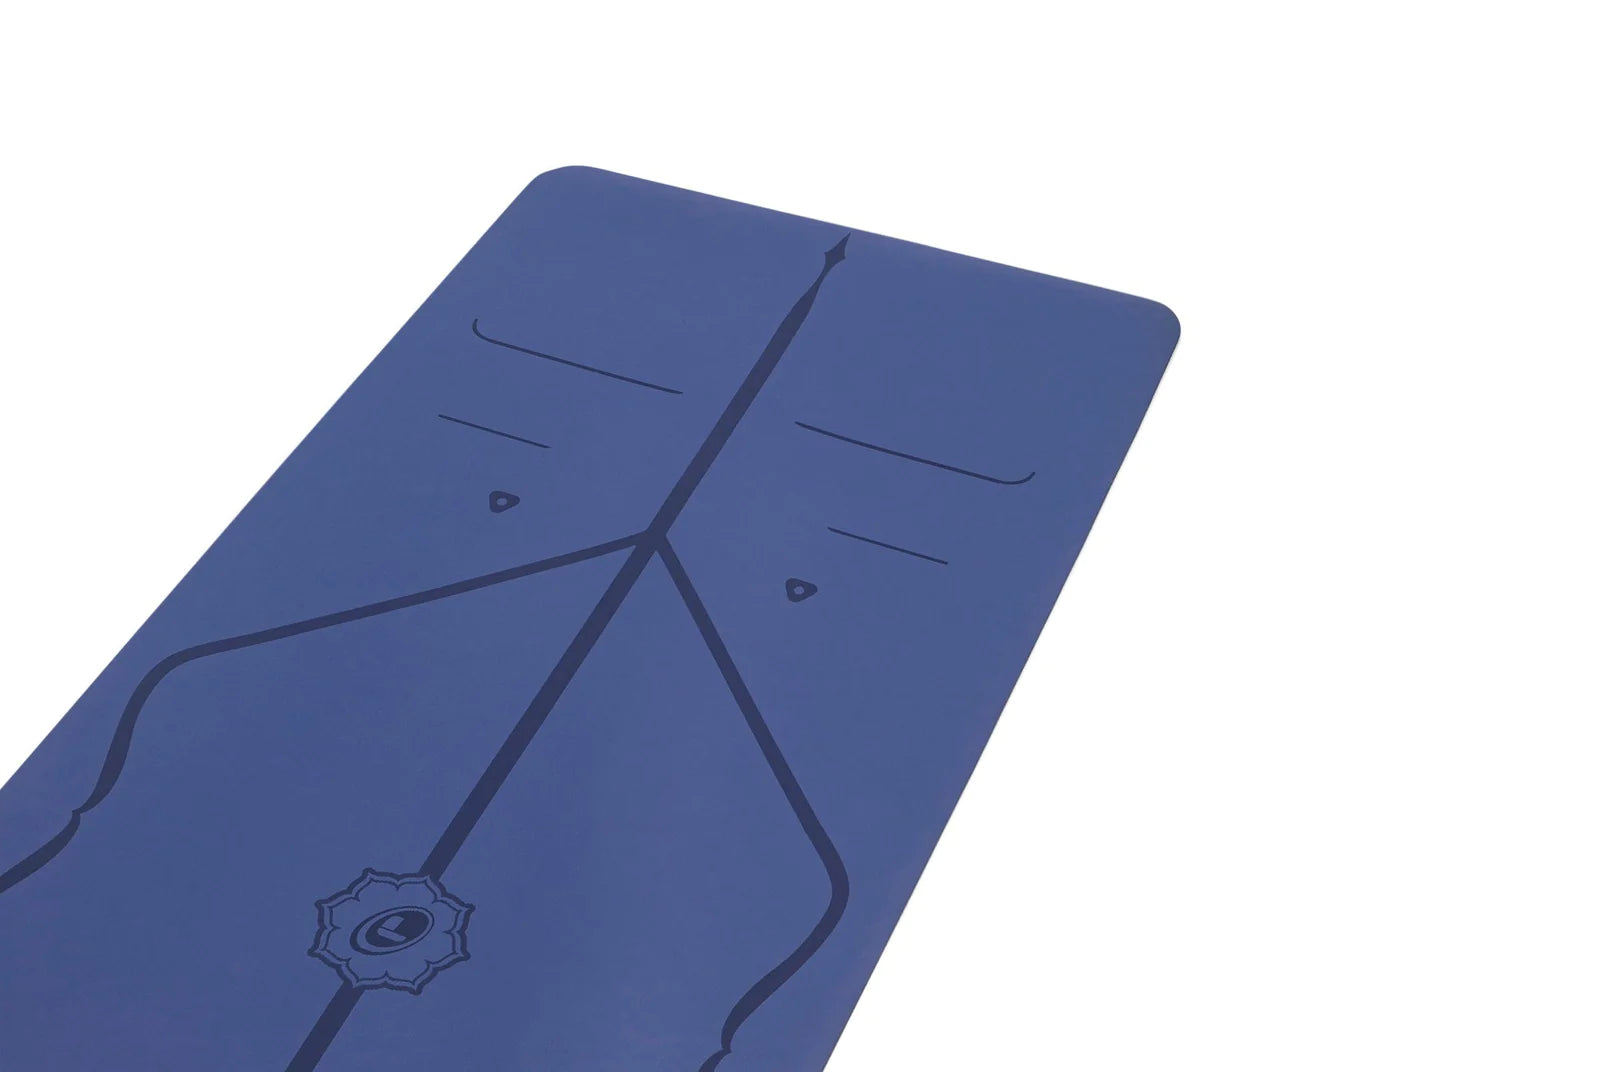 Image of Liforme Yoga Mat in Dusk Blue with unique alignment markers and non-toxic materials